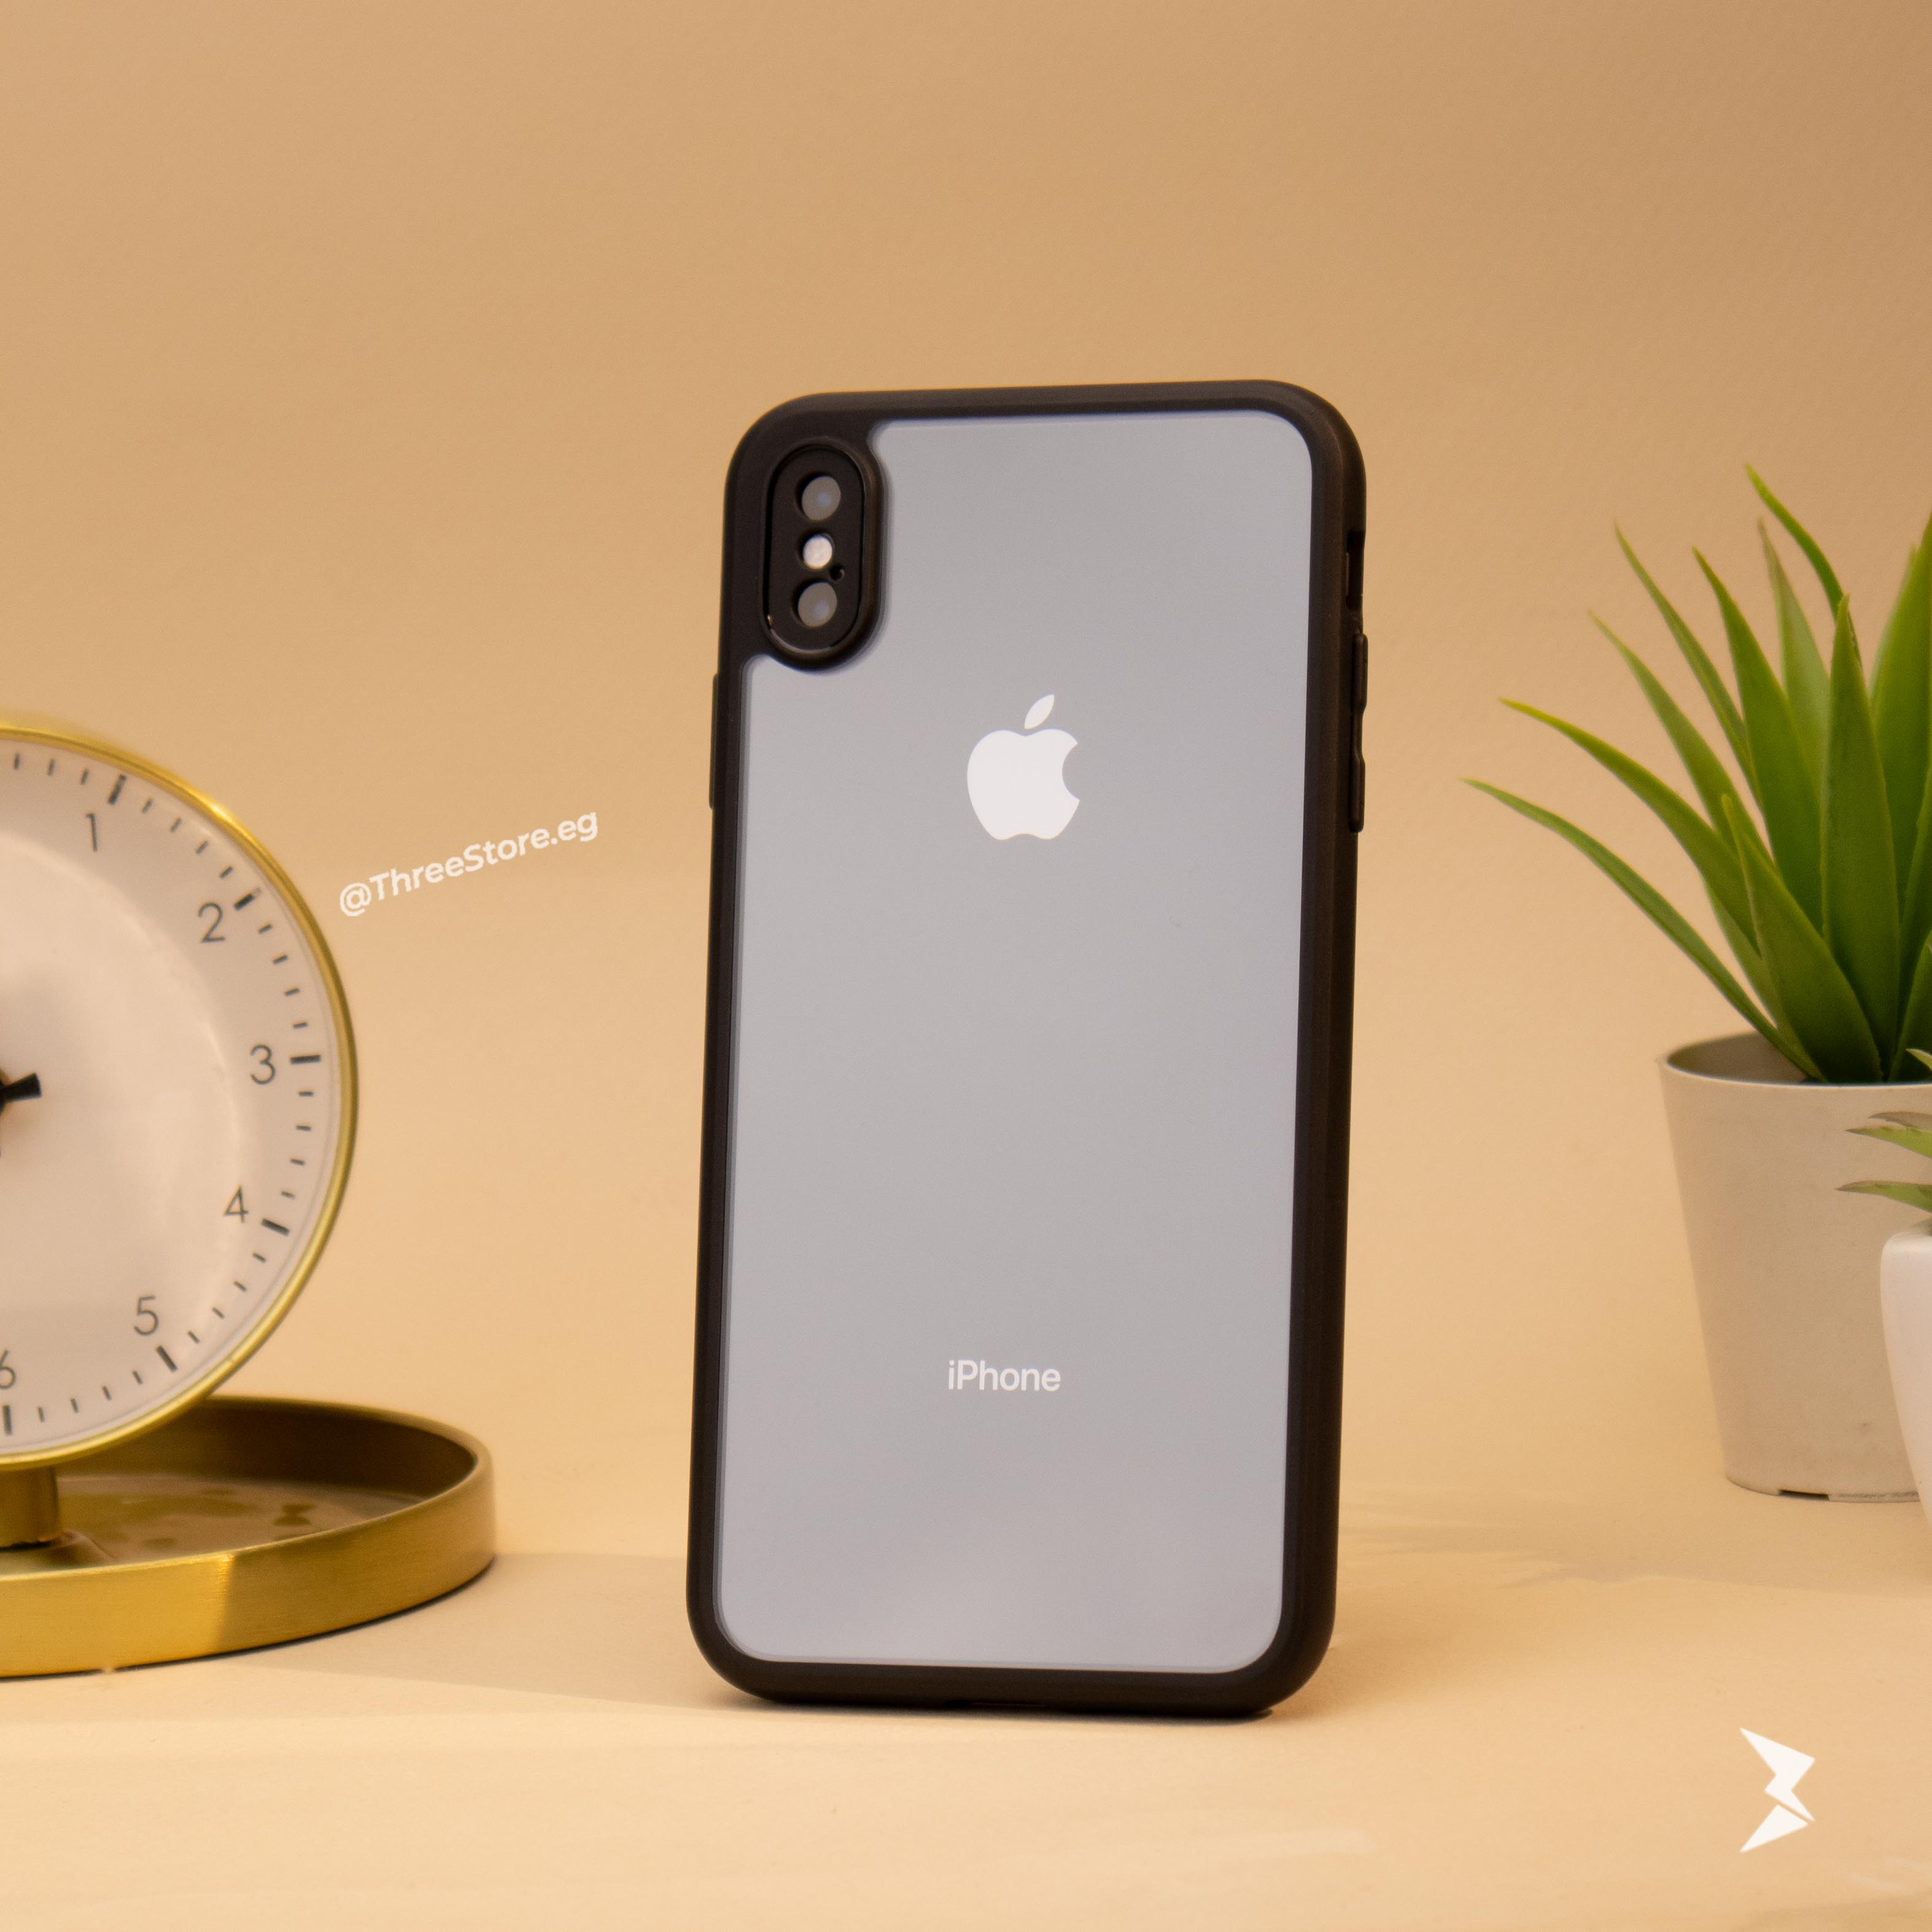 TPU Camera Protection Case iPhone X Max Three store